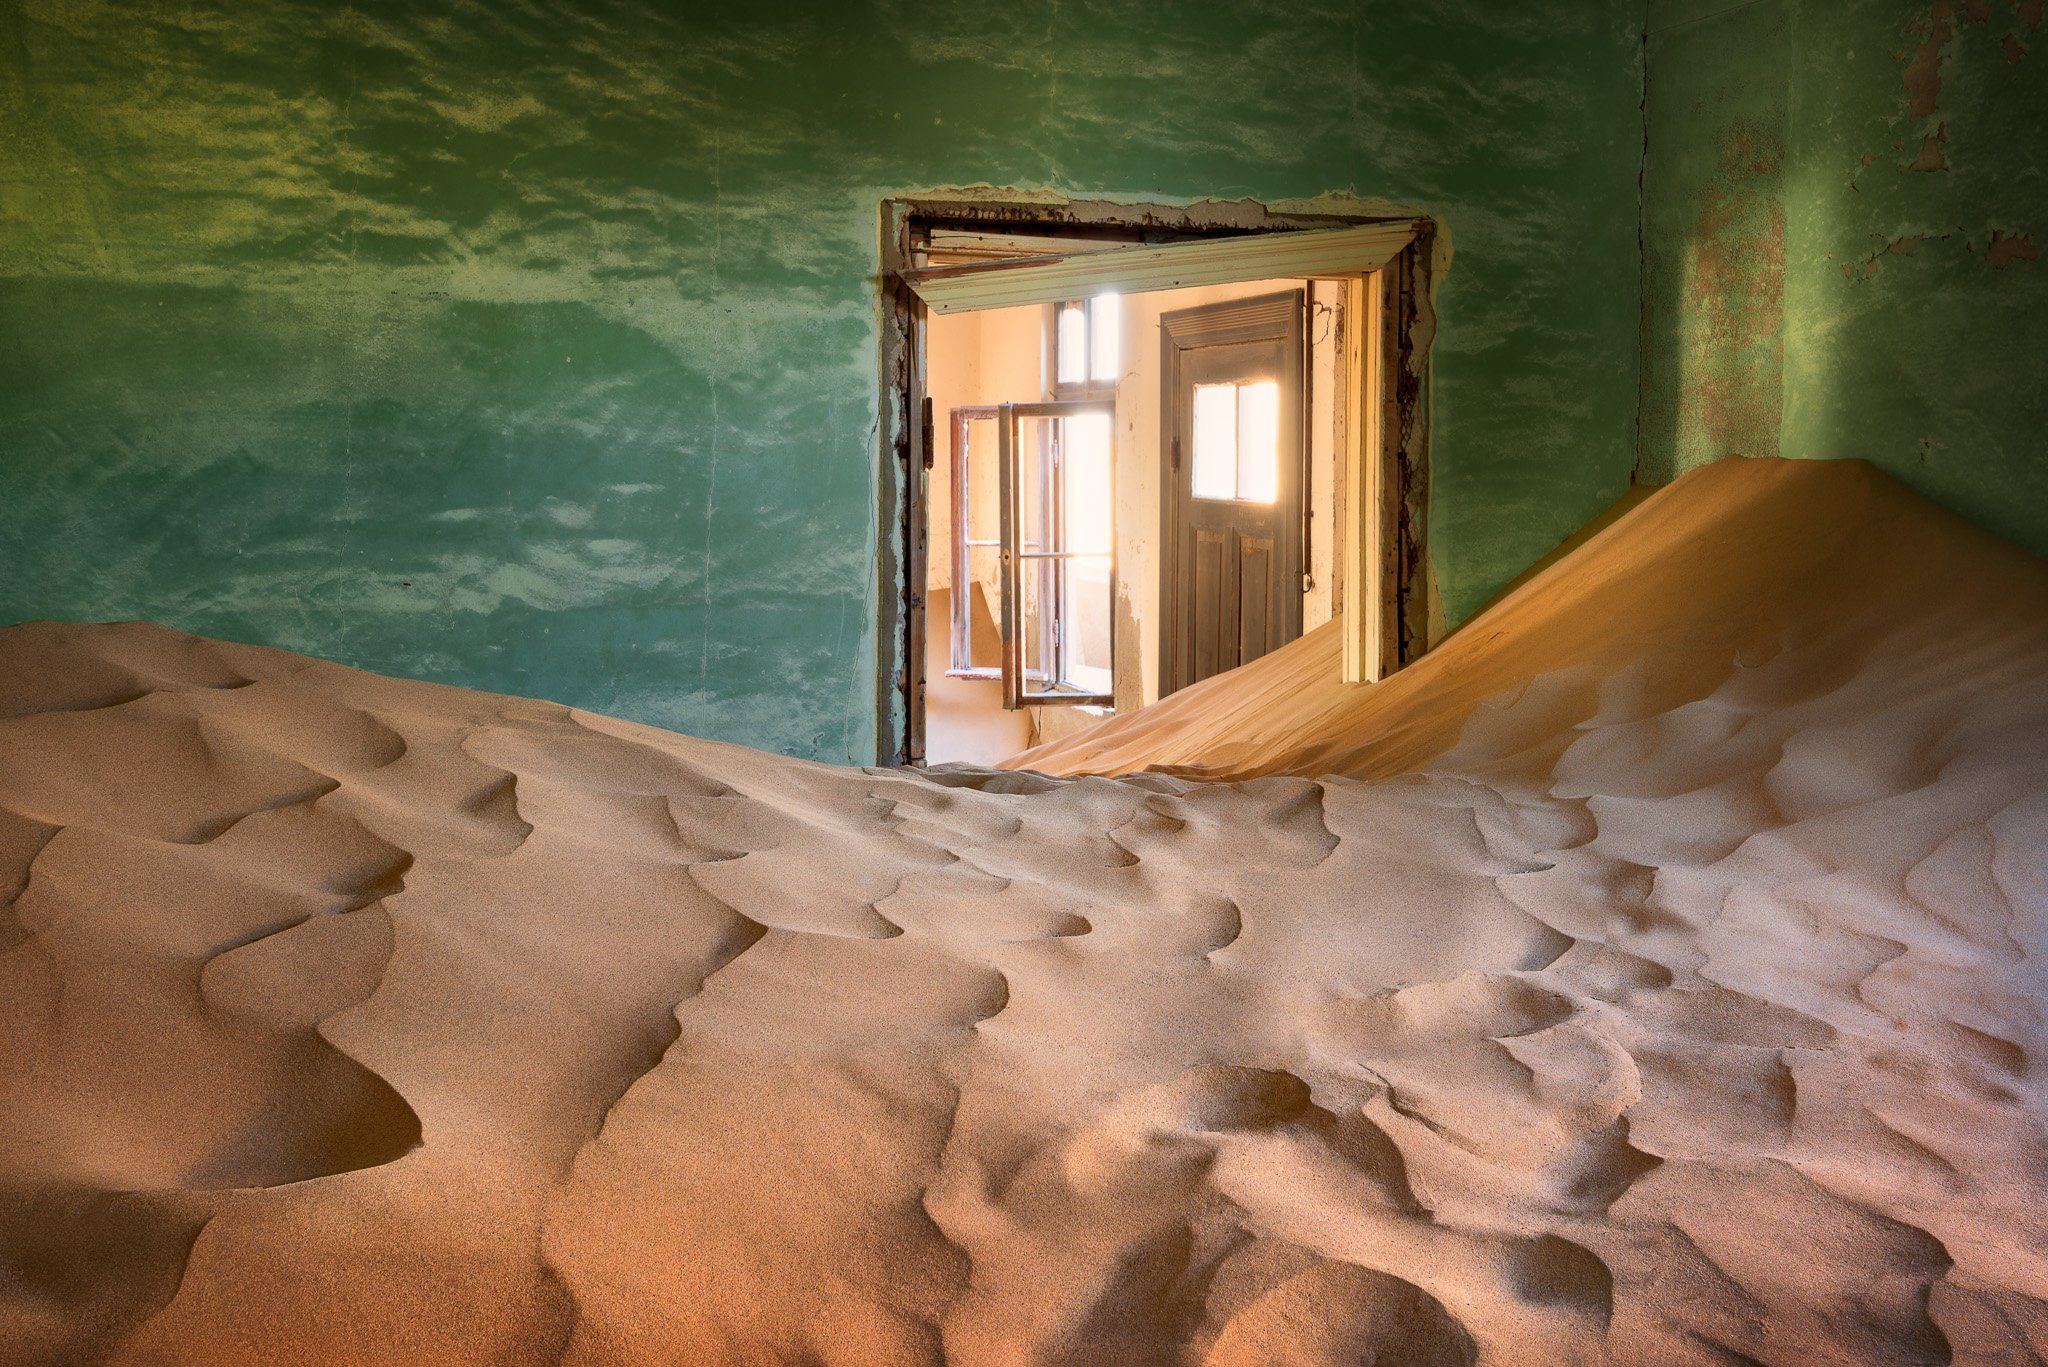 abandoned, Africa, african, architecture, barren, blue, building, city, climate, color, colour, decayed, demolition, desert, diamond, door, doorway, drought, dry, dune, empty, environment, german, ghost, green, haunted, historical, history, home, house, i, Andrey Omelyanchuk